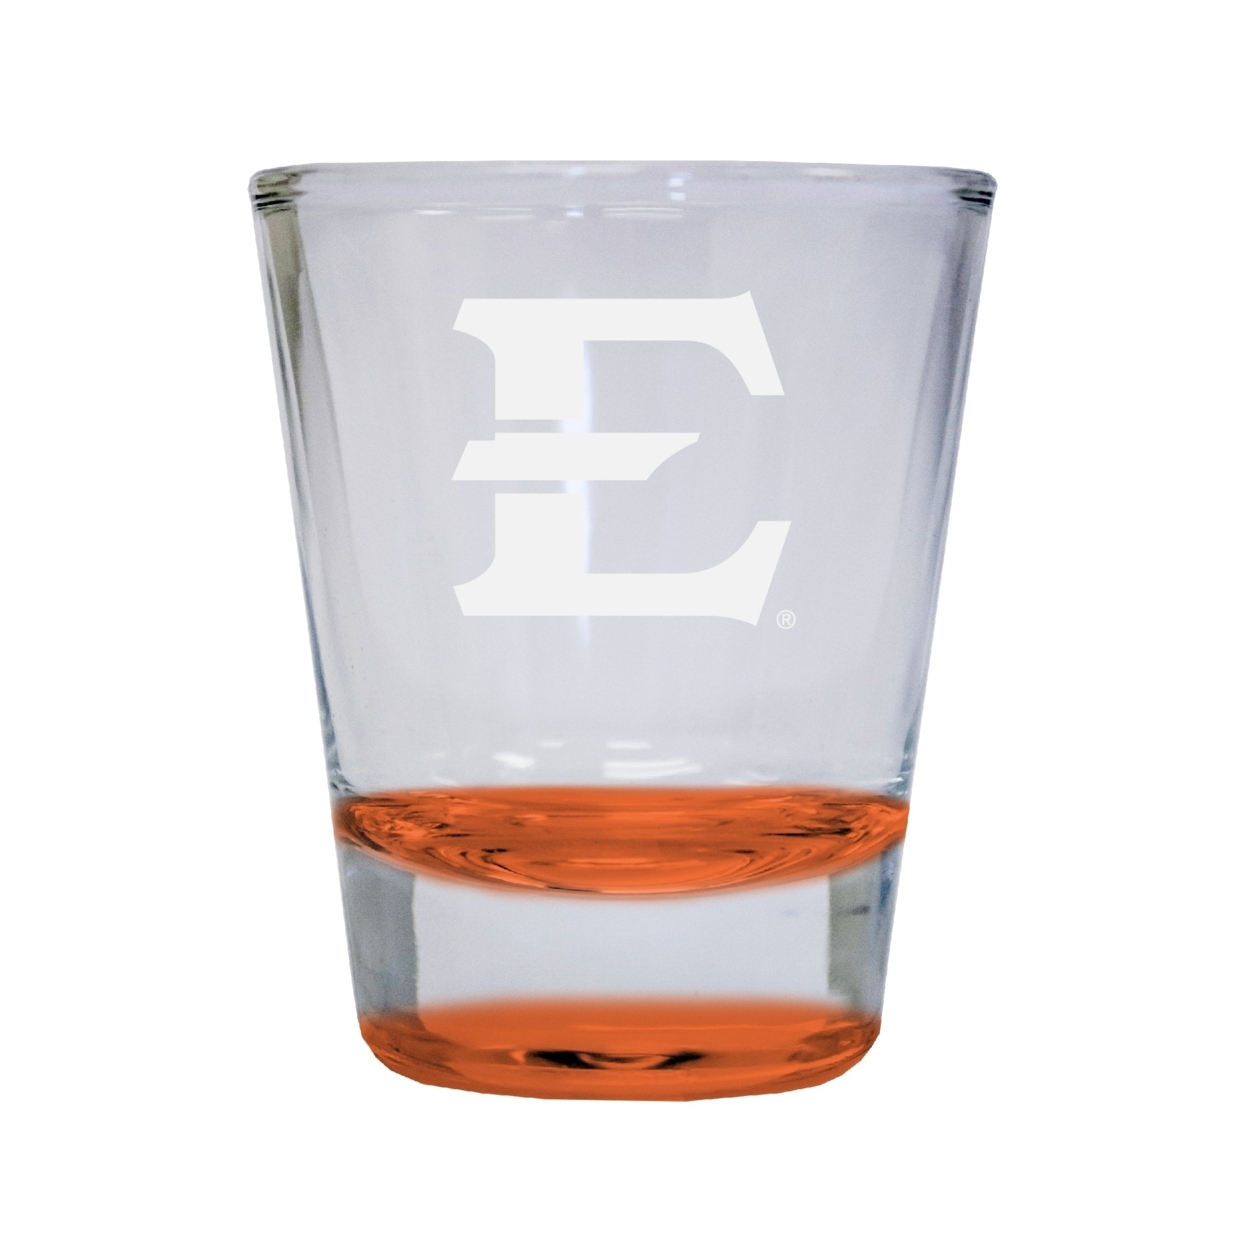 East Tennessee State University Etched Round Shot Glass 2 Oz Orange